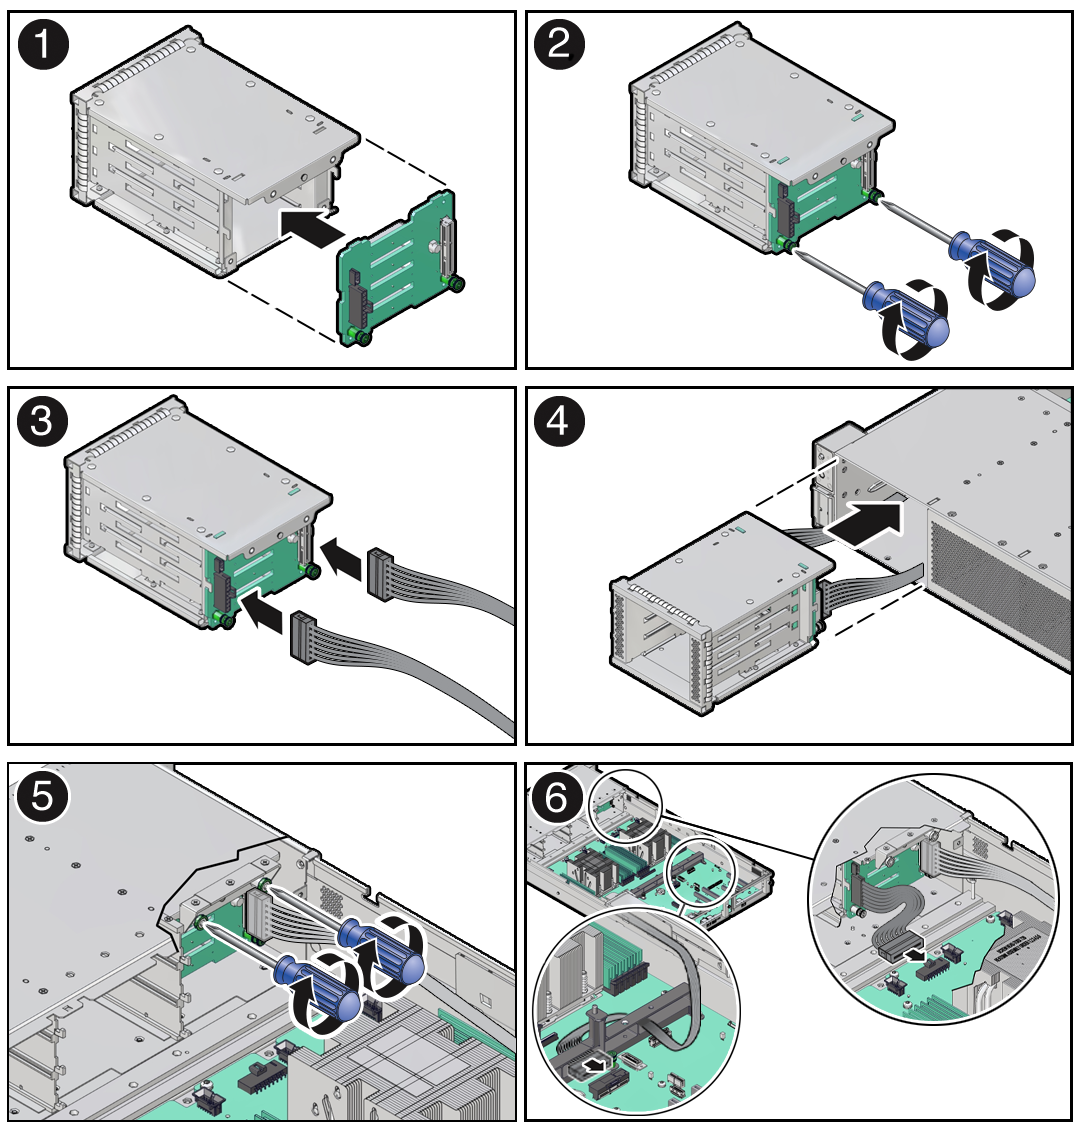 Figure showing the 4-Drive disk backplane and storage drive cage being installed in to the server.